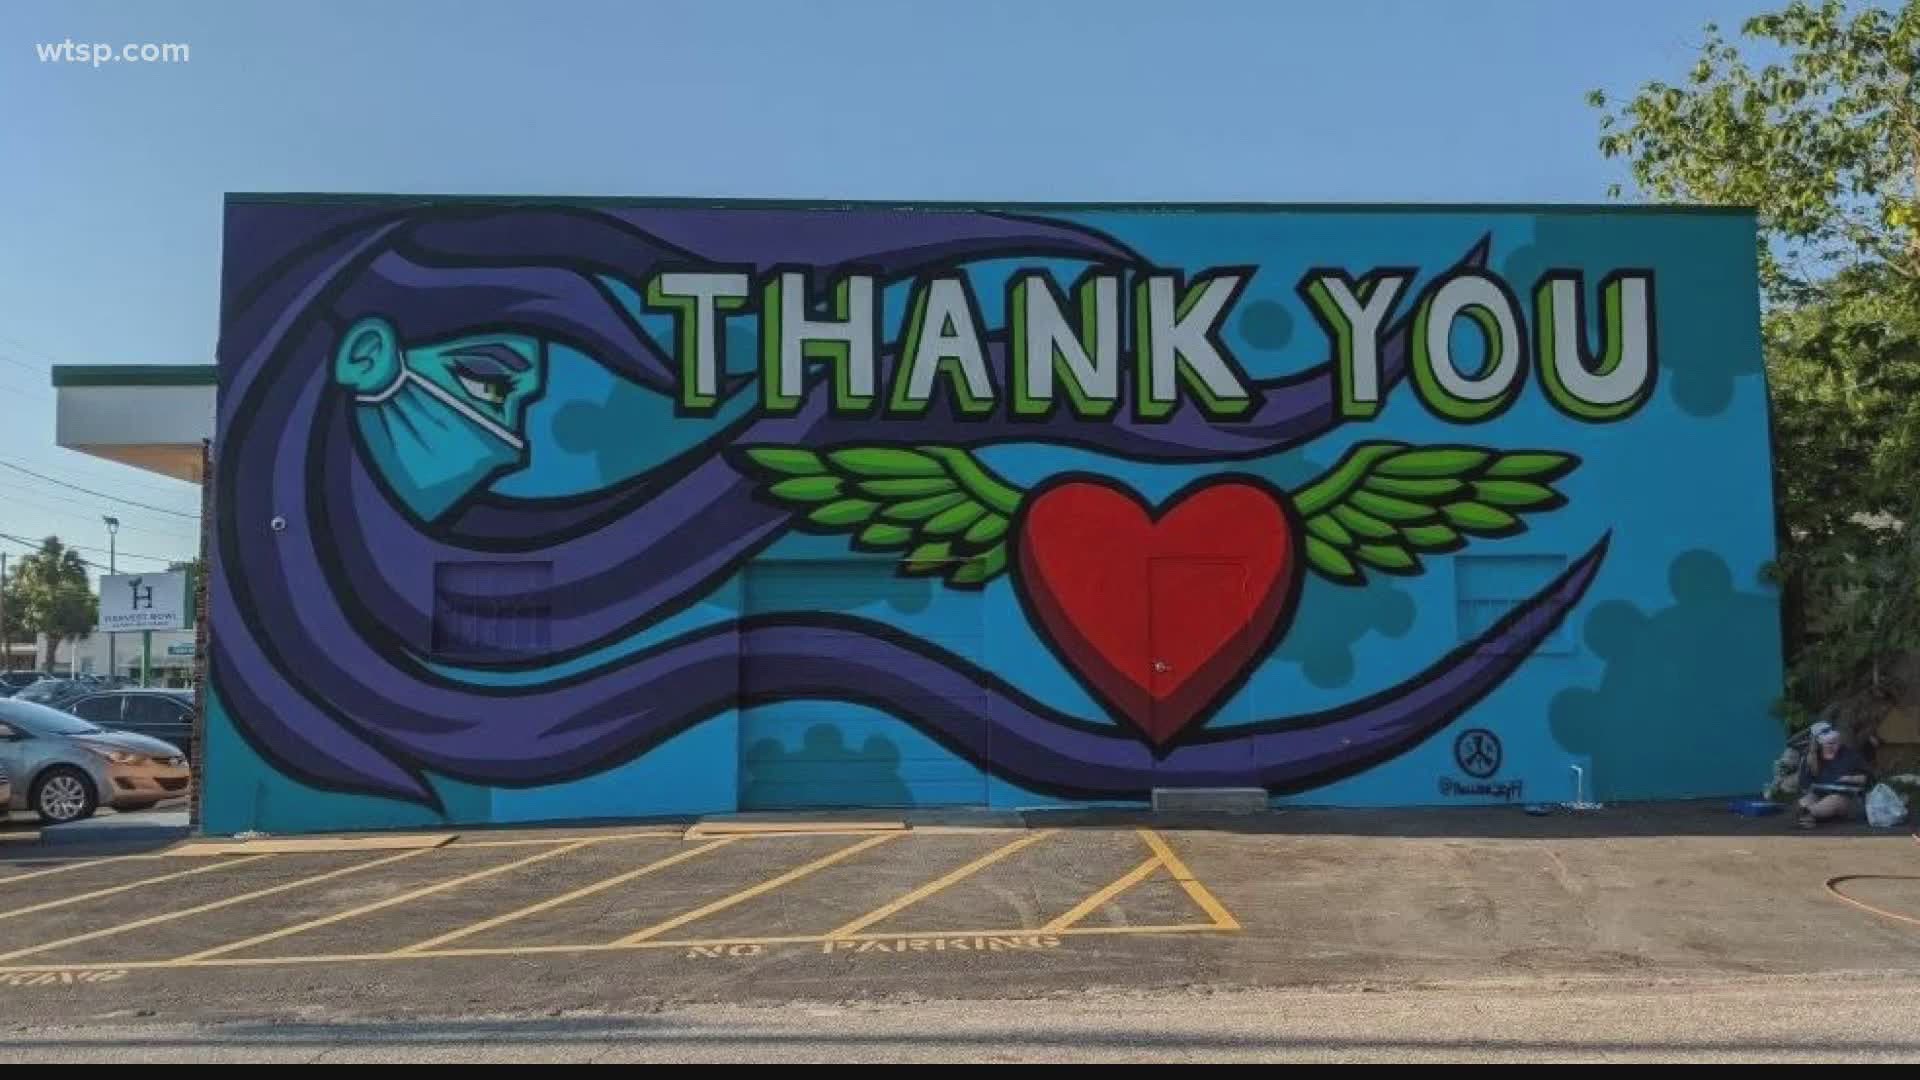 Skylar Suarez painted a 'thank you' mural to honor men and women serving as first responders during the COVID-19 pandemic.